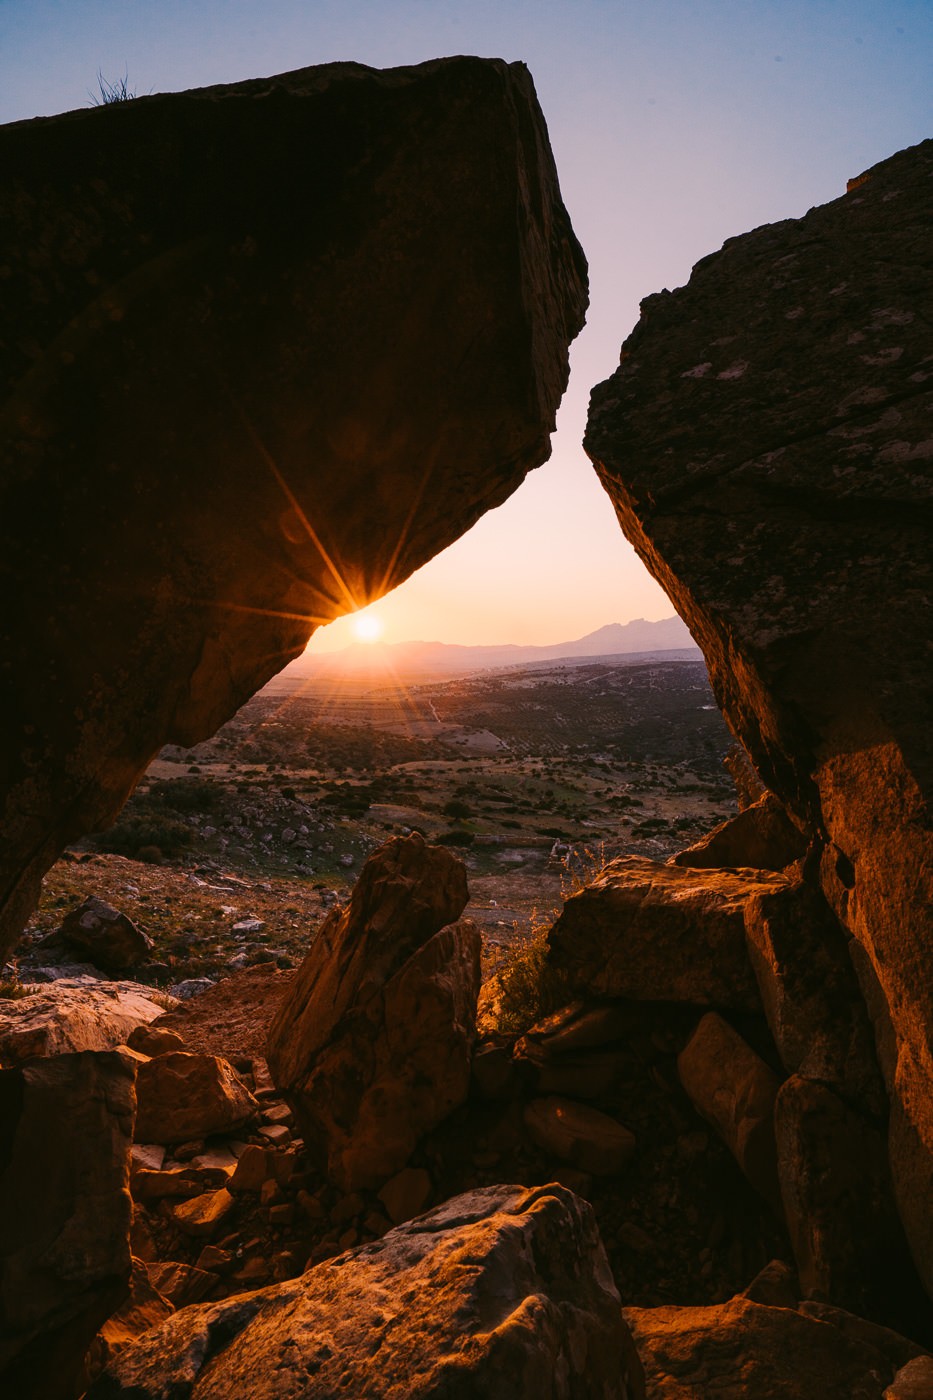 the sun is setting behind a rock formation.